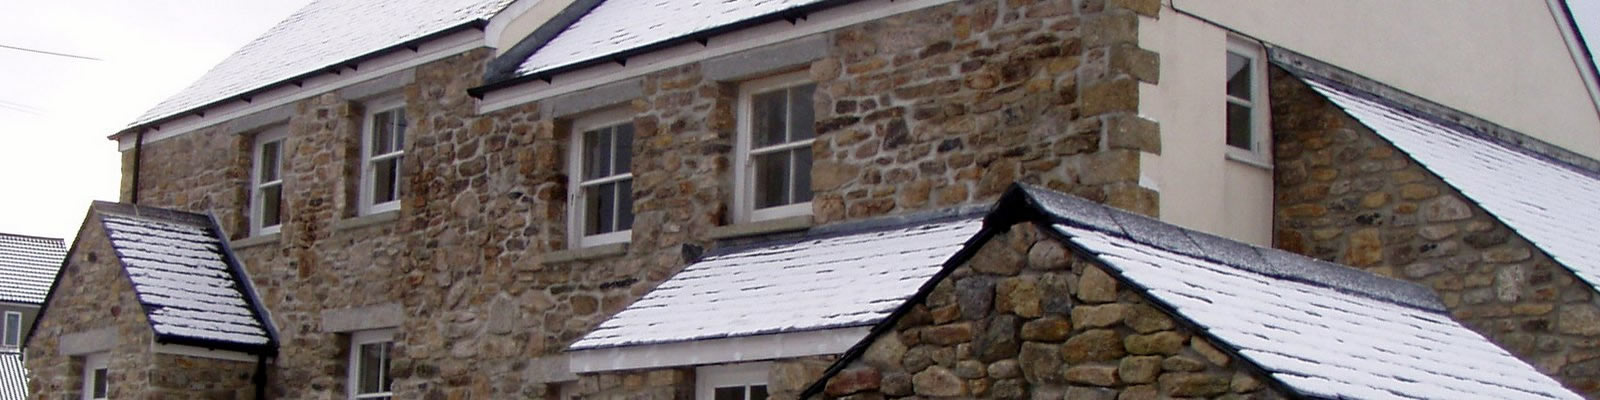 New build in traditional stone